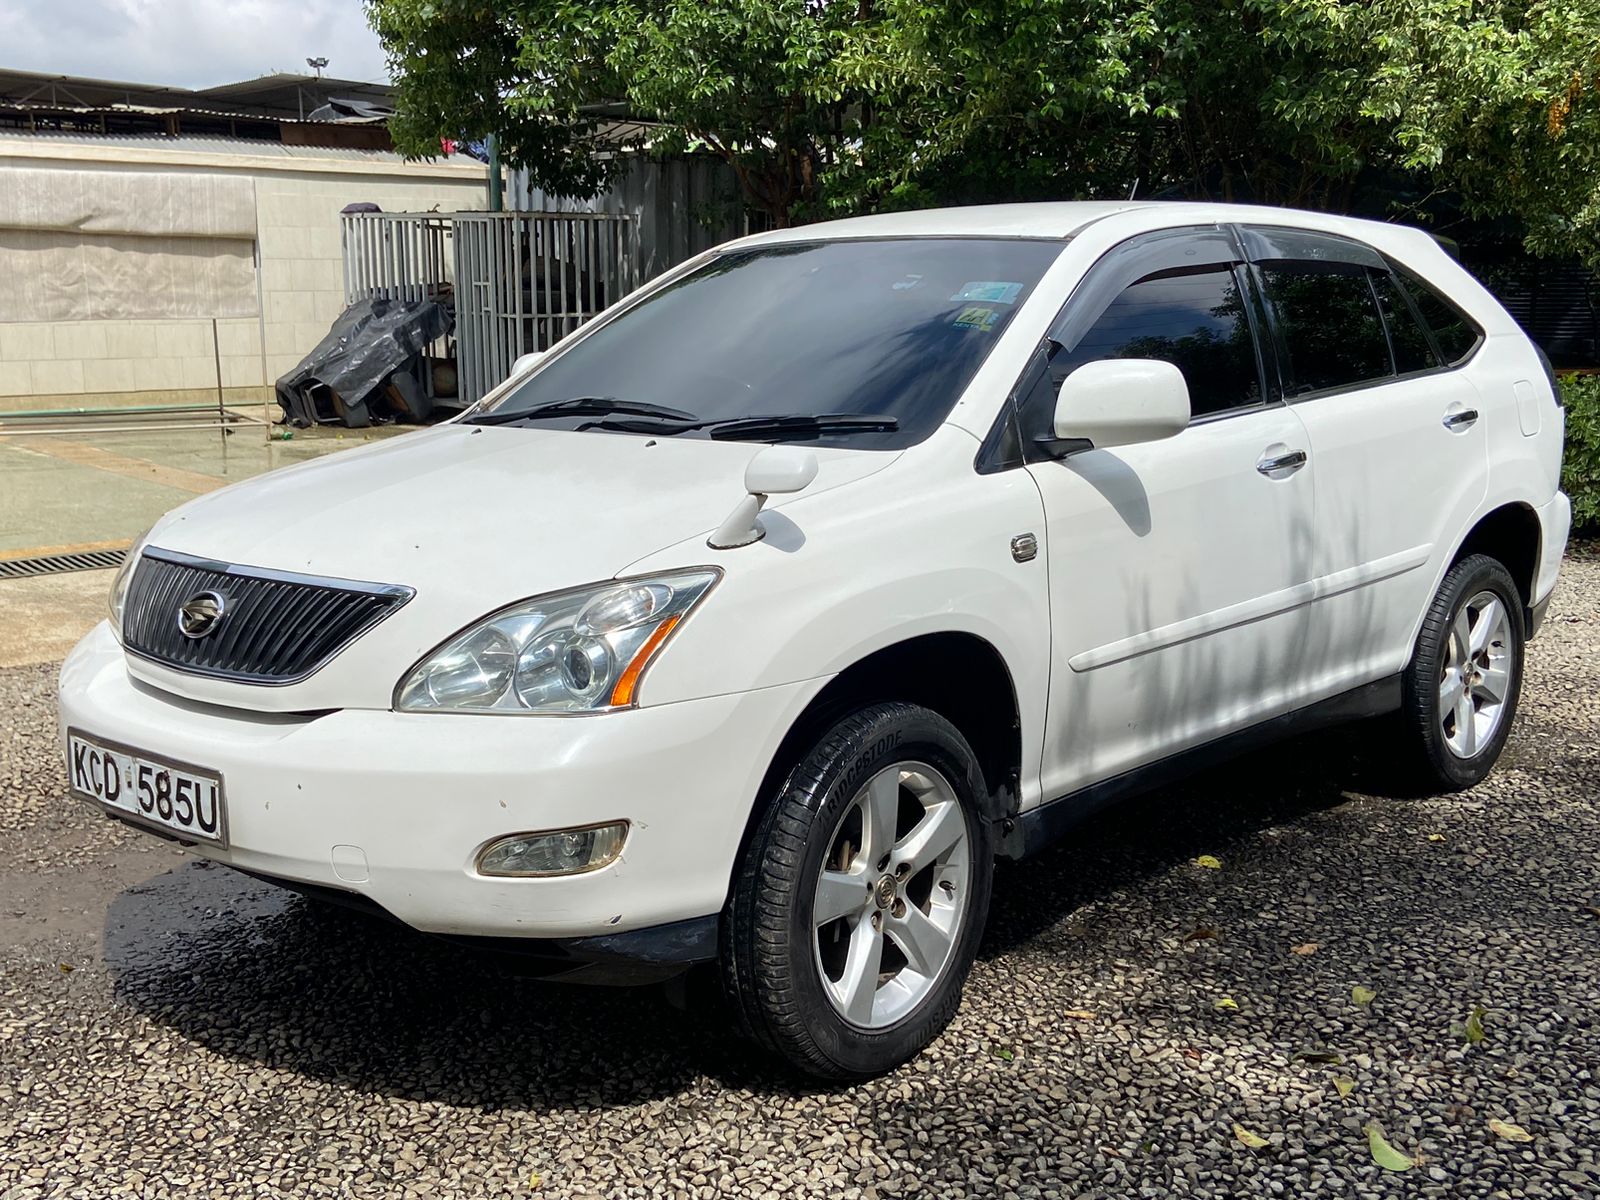 Toyota Harrier You Pay 30% Deposit Trade in OK EXCLUSIVE